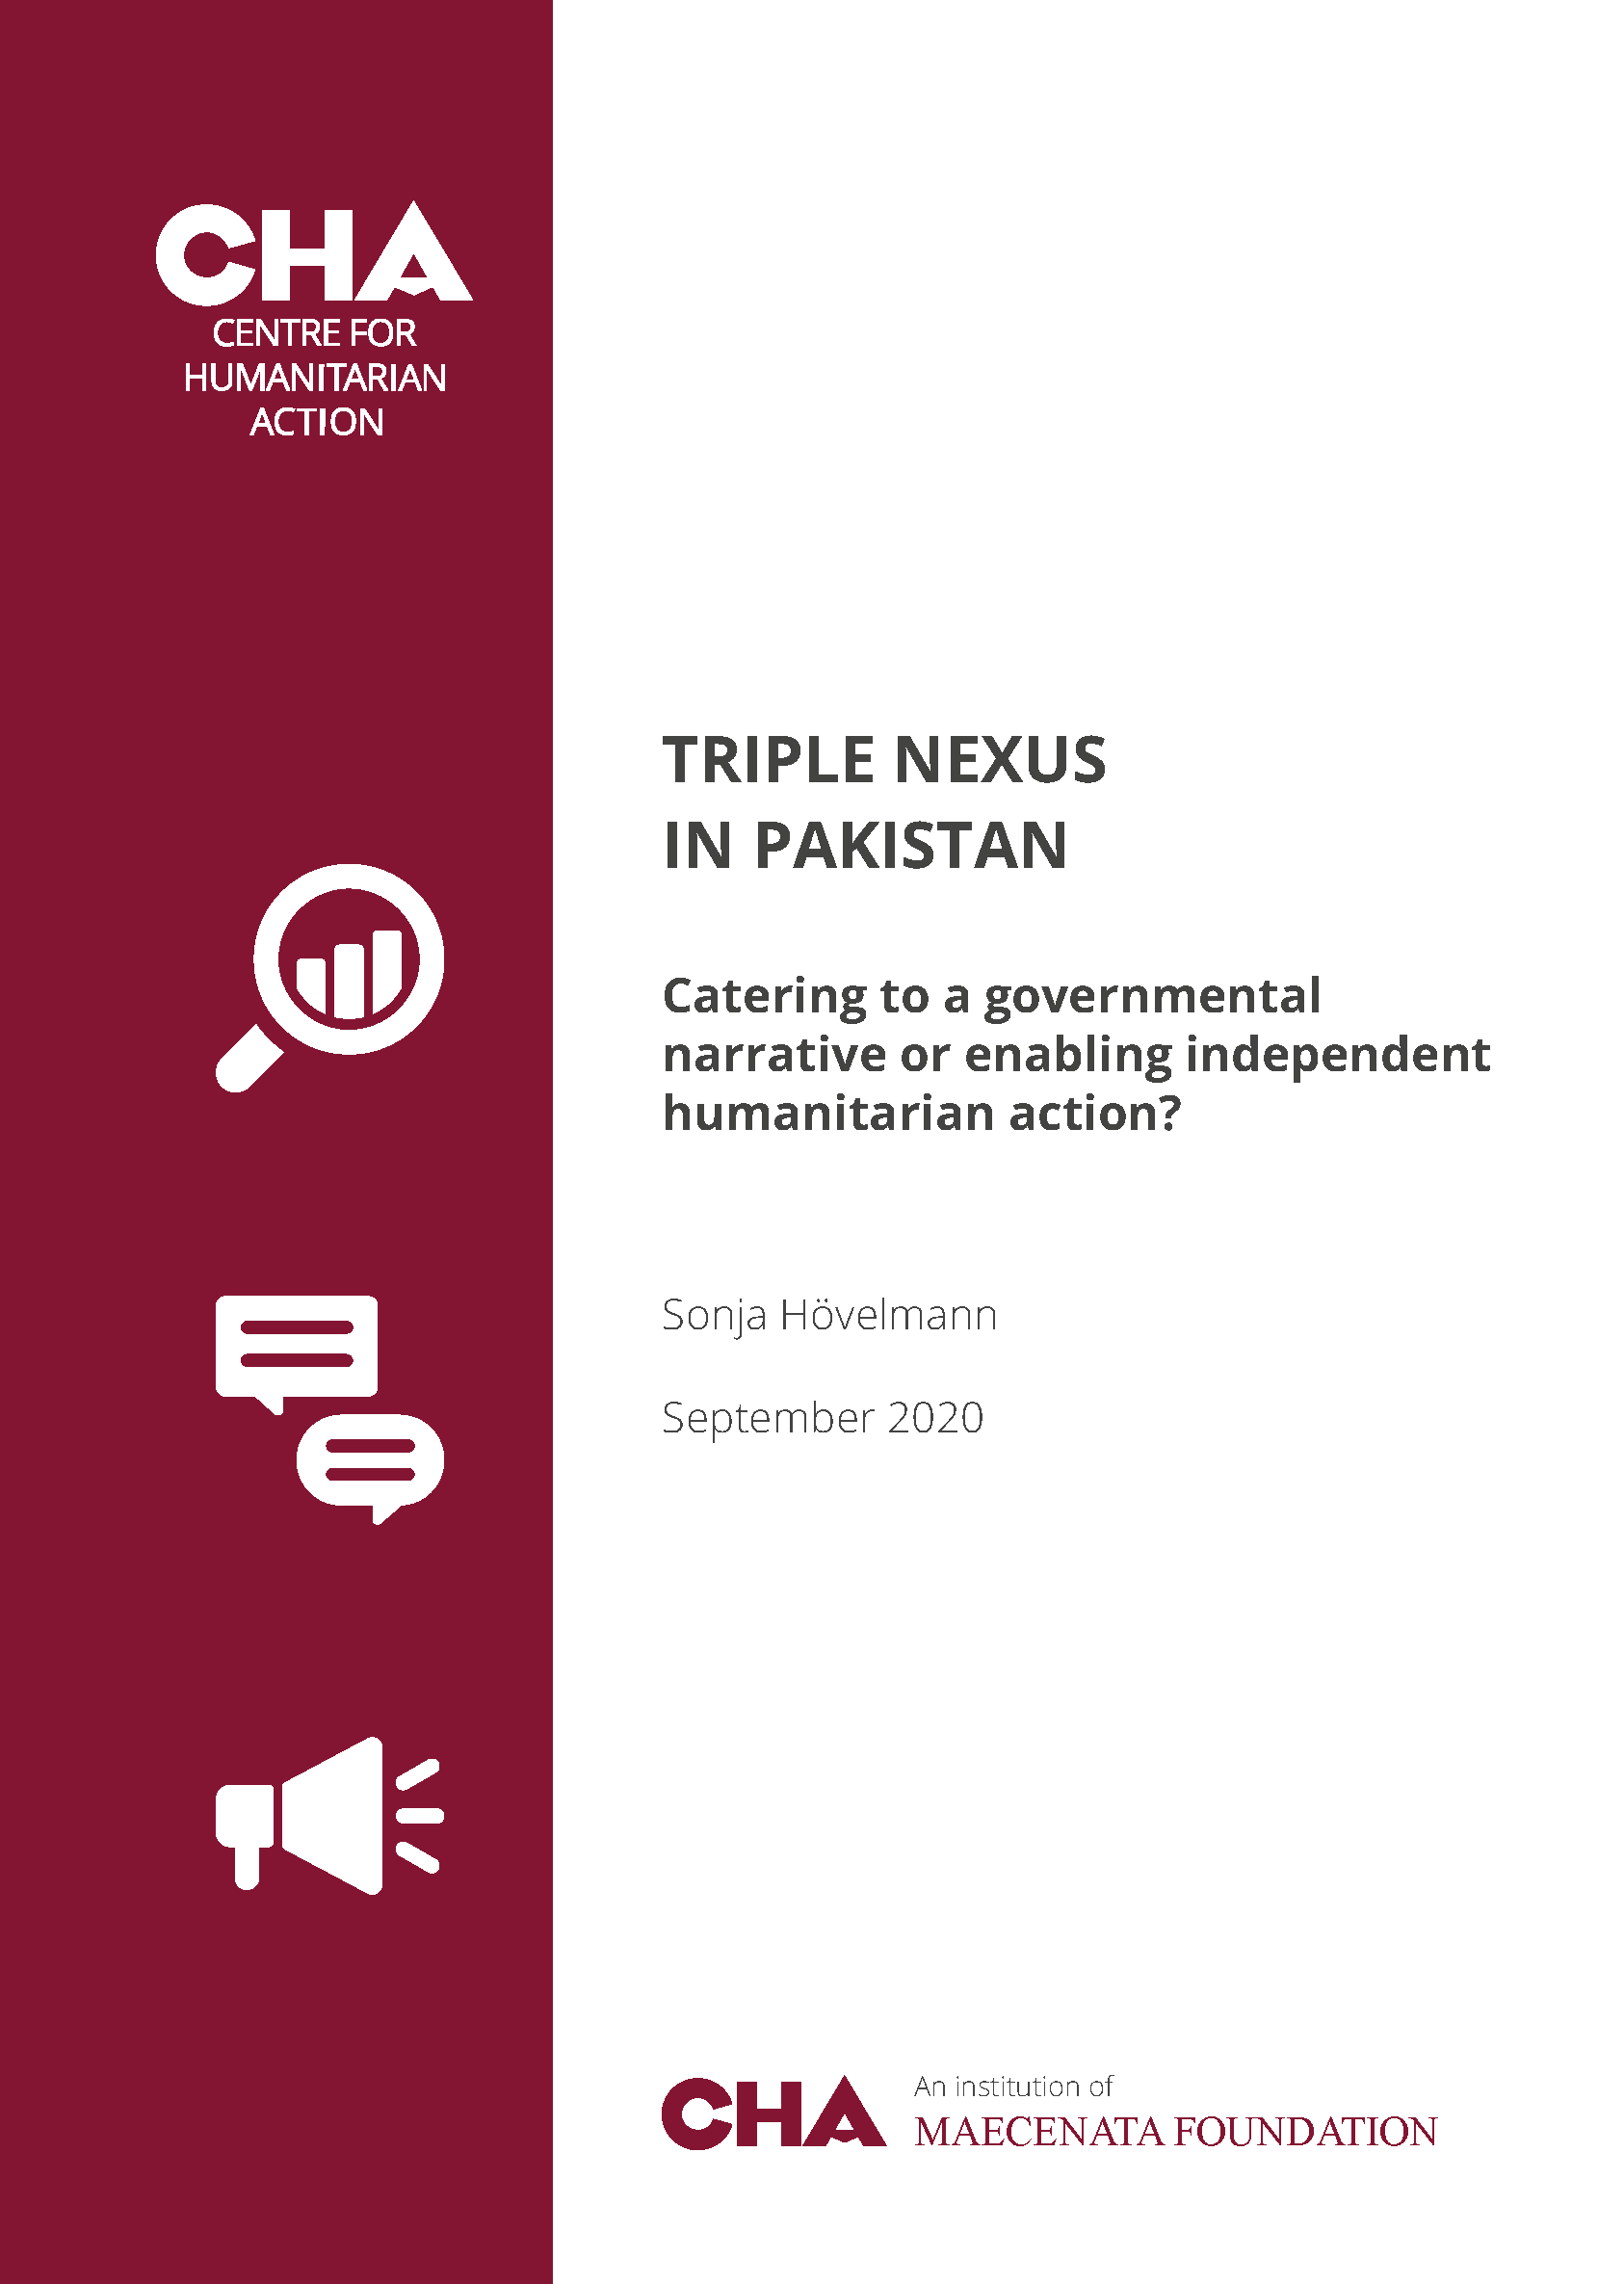 Cover page for Triple Nexus in Pakistan